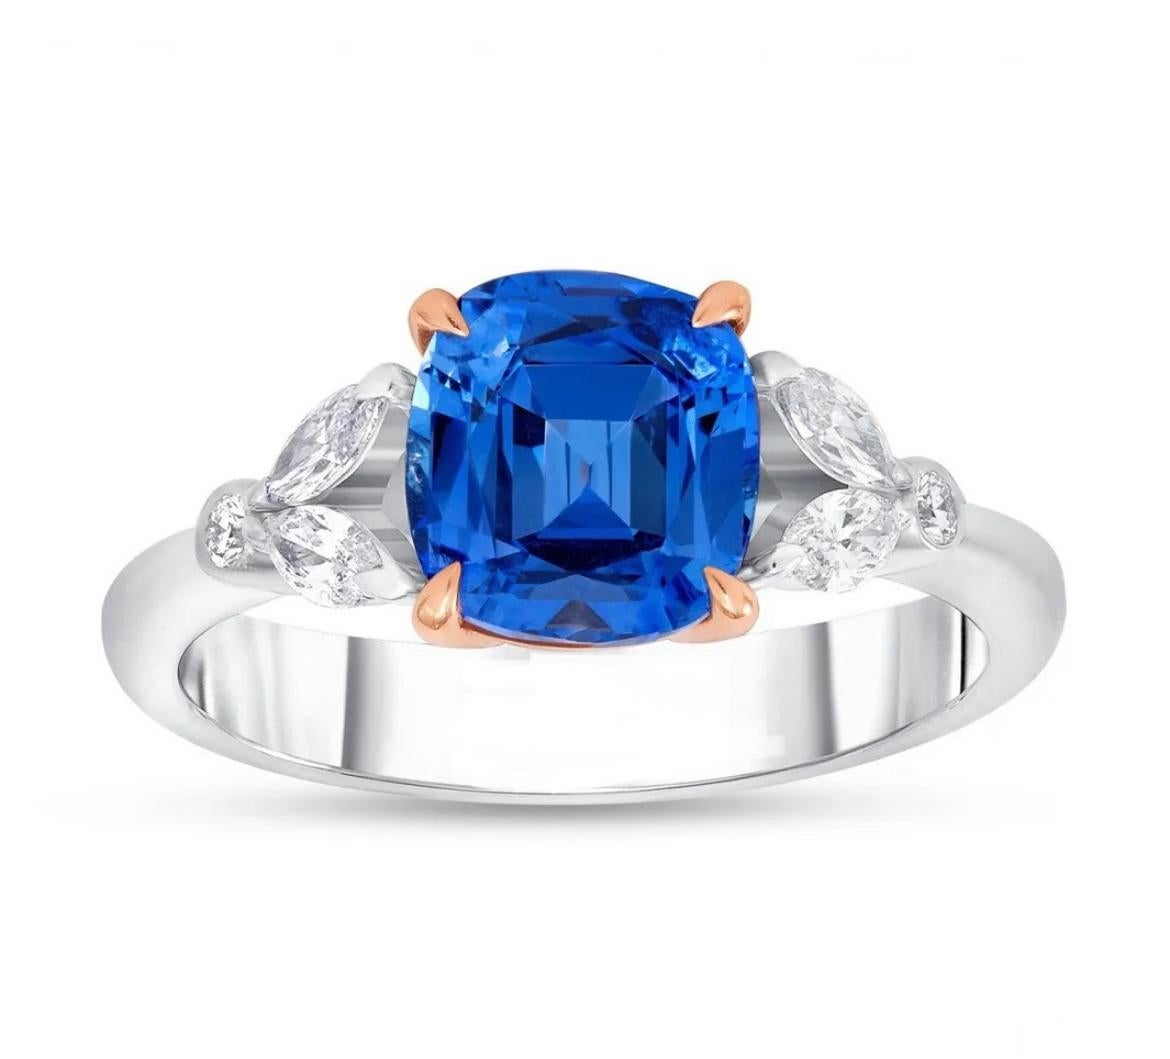 18K white with rose gold ring, featuring a delightful 2.14-carat, untreated Blue Sapphire from Sri Lanka. Complemented by marquise and round white diamonds totaling 0.25 cts, this remarkable sapphire is accompanied by an AGL brief report.